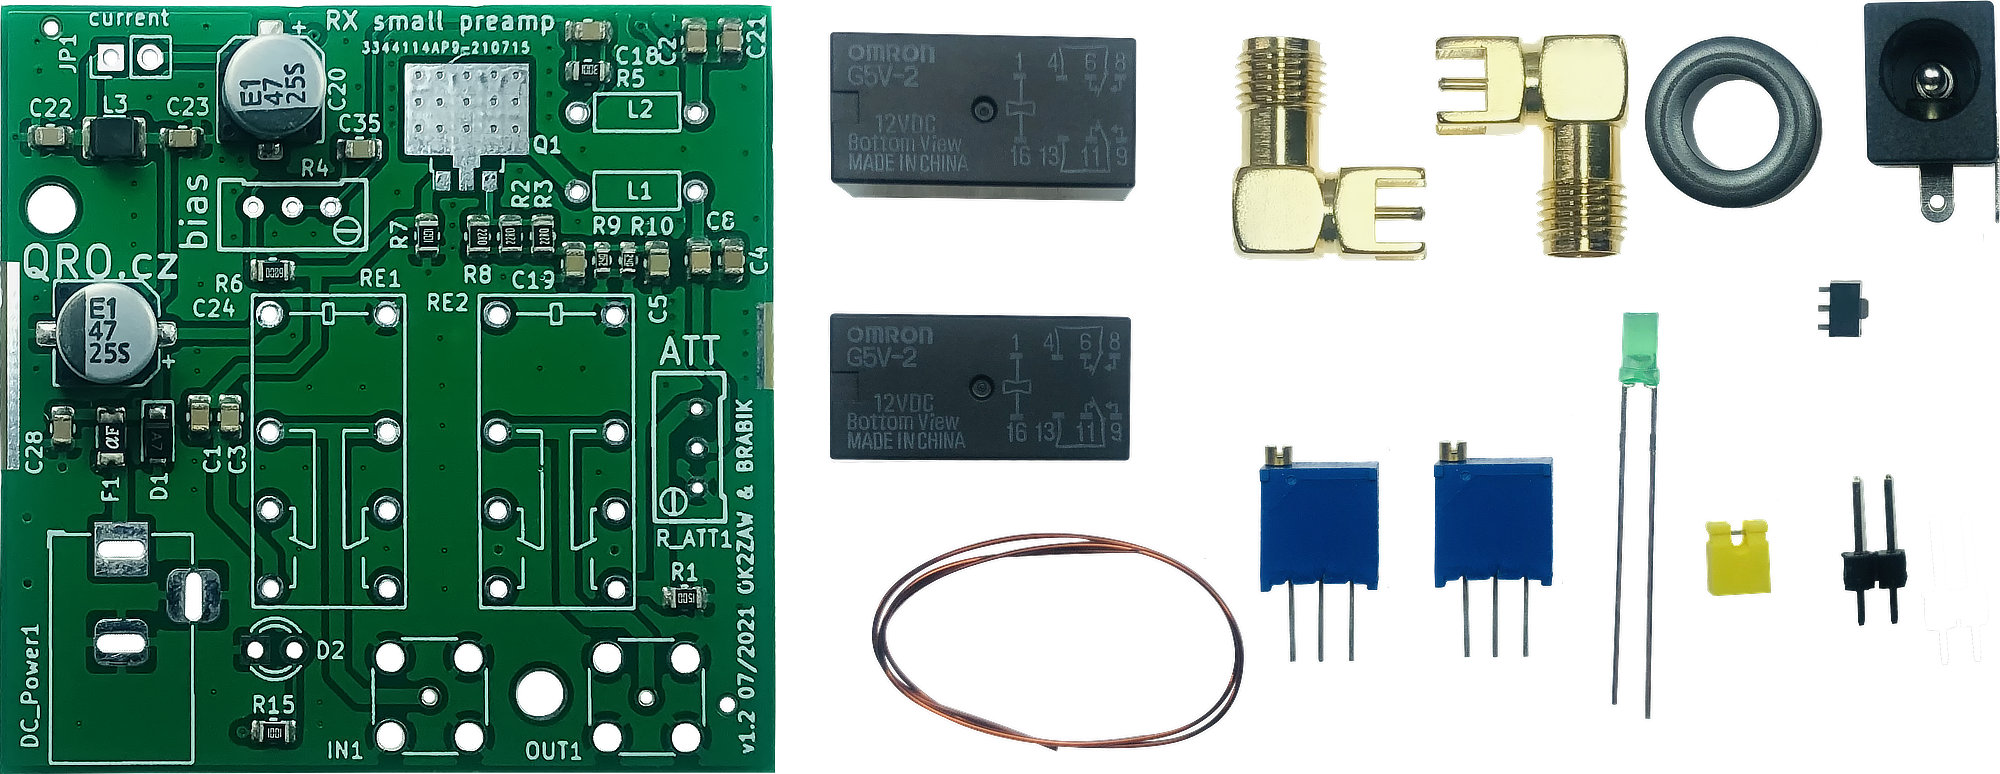 rx small preamplifier kit by qro.cz hamparts.shop